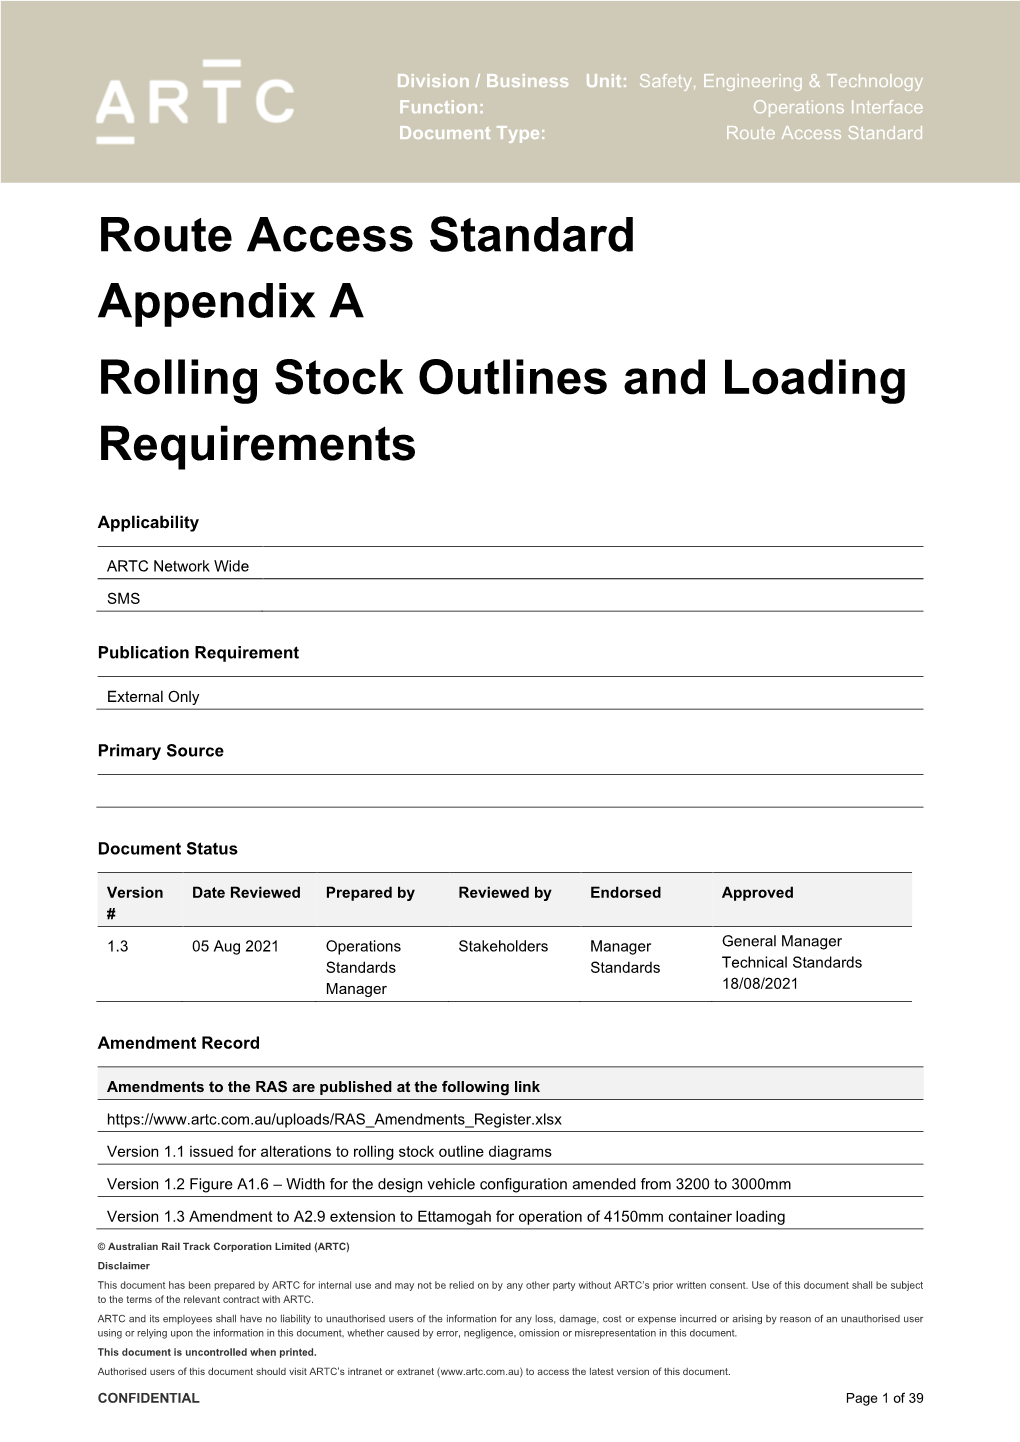 RAS Manual Appendix a – Rolling Stock Outlines and Loading